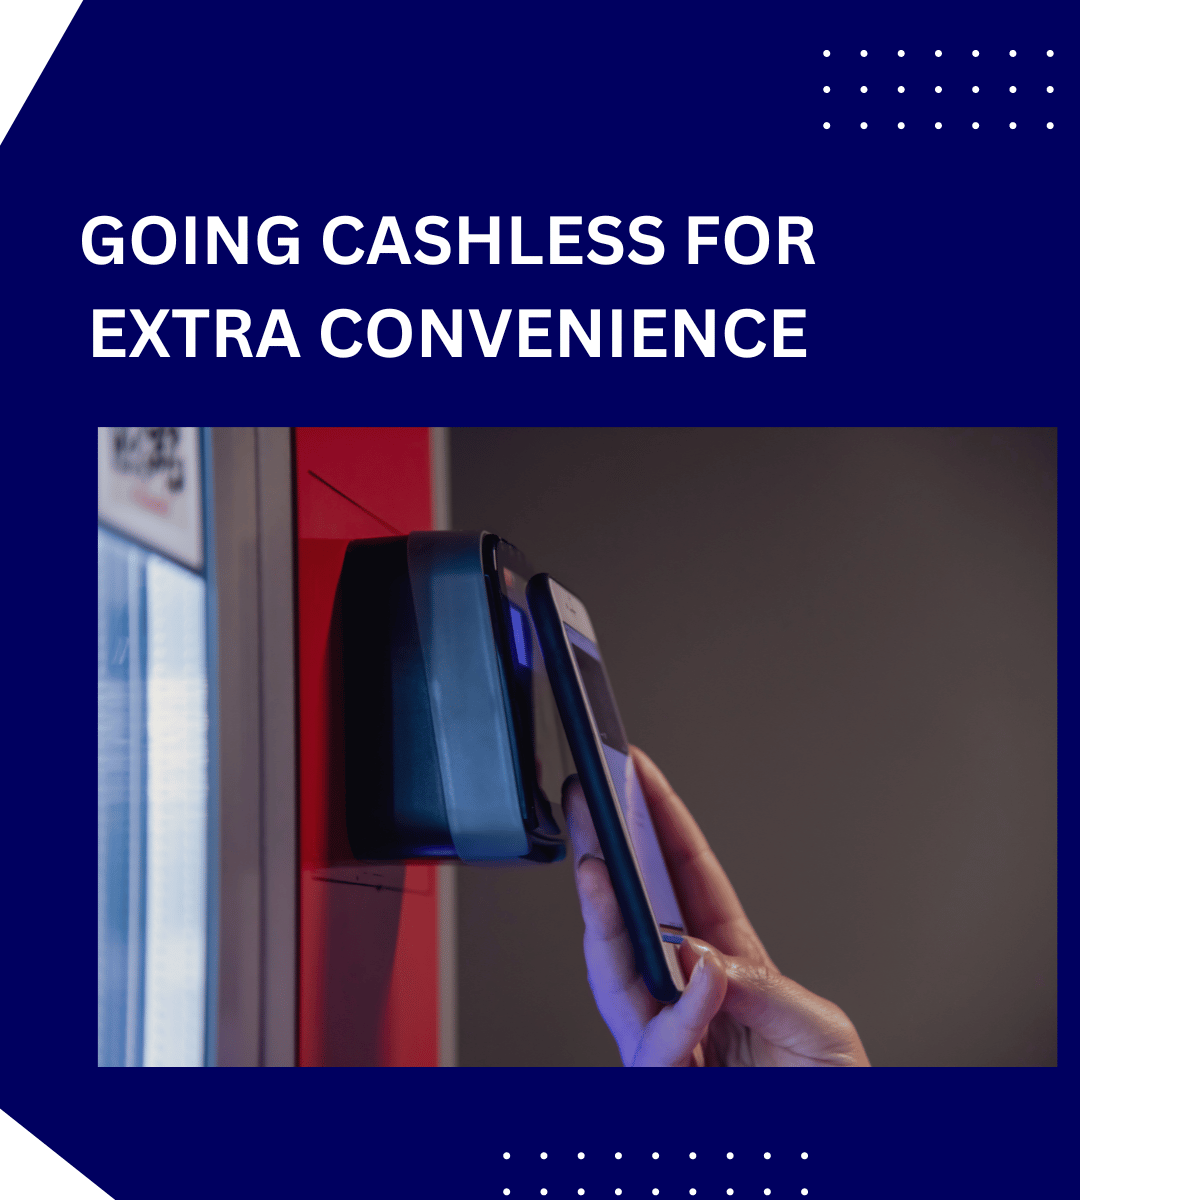 GOING CASHLESS FOR EXTRA CONVENIENCE